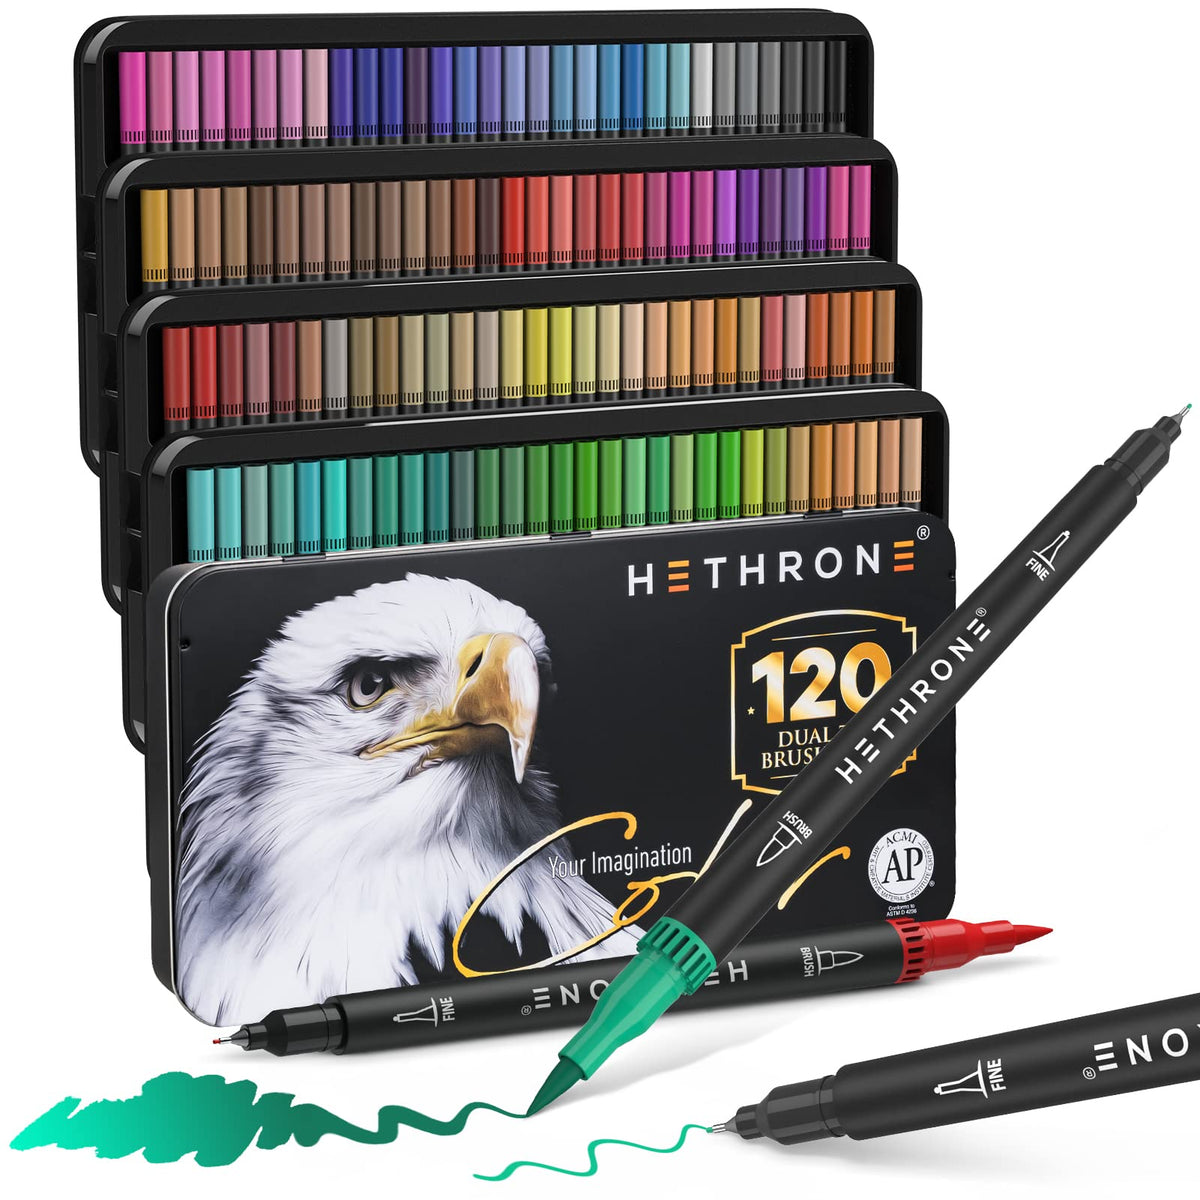 Hethrone Black Markers for Drawing - Marker Pens Brush Artists